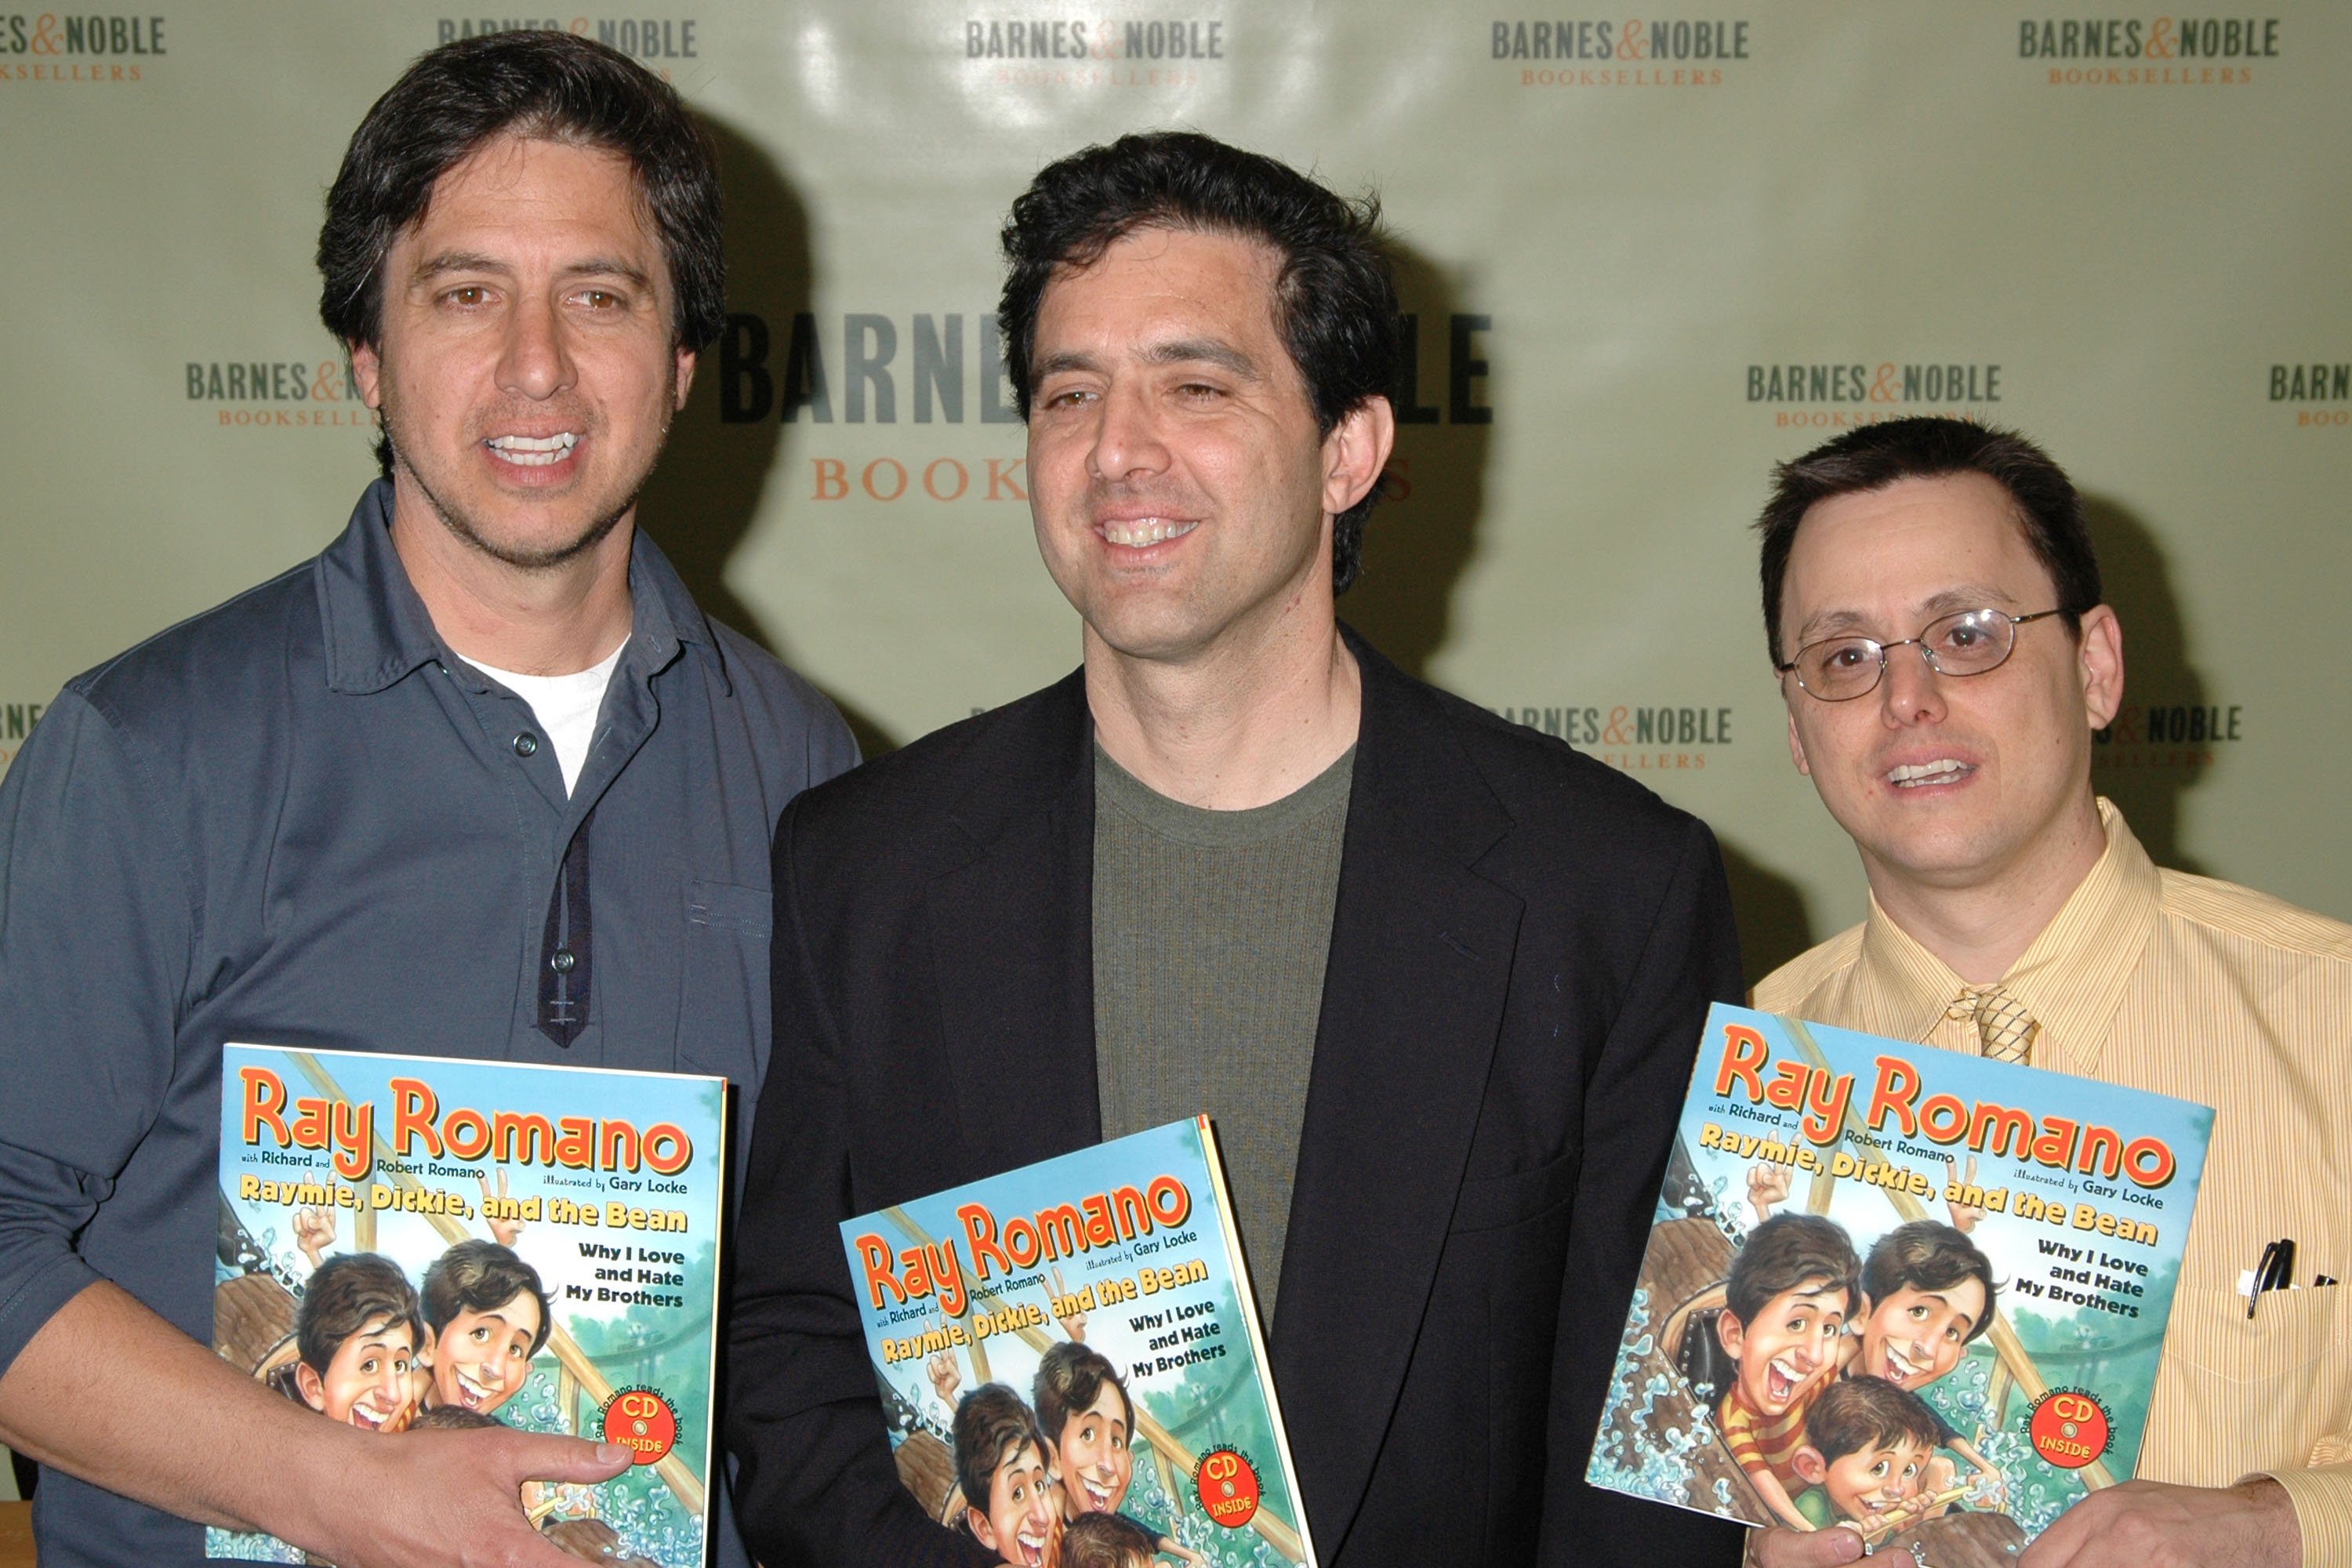 Ray, Richard and Robert Romano during Ray Romano Signs His Book "Raymie, Dickie, and the Bean: Why I Love and Hate My Brothers" at Barnes & Noble Rockefeller Center in New York City on March 29, 2005 | Source: Getty Images